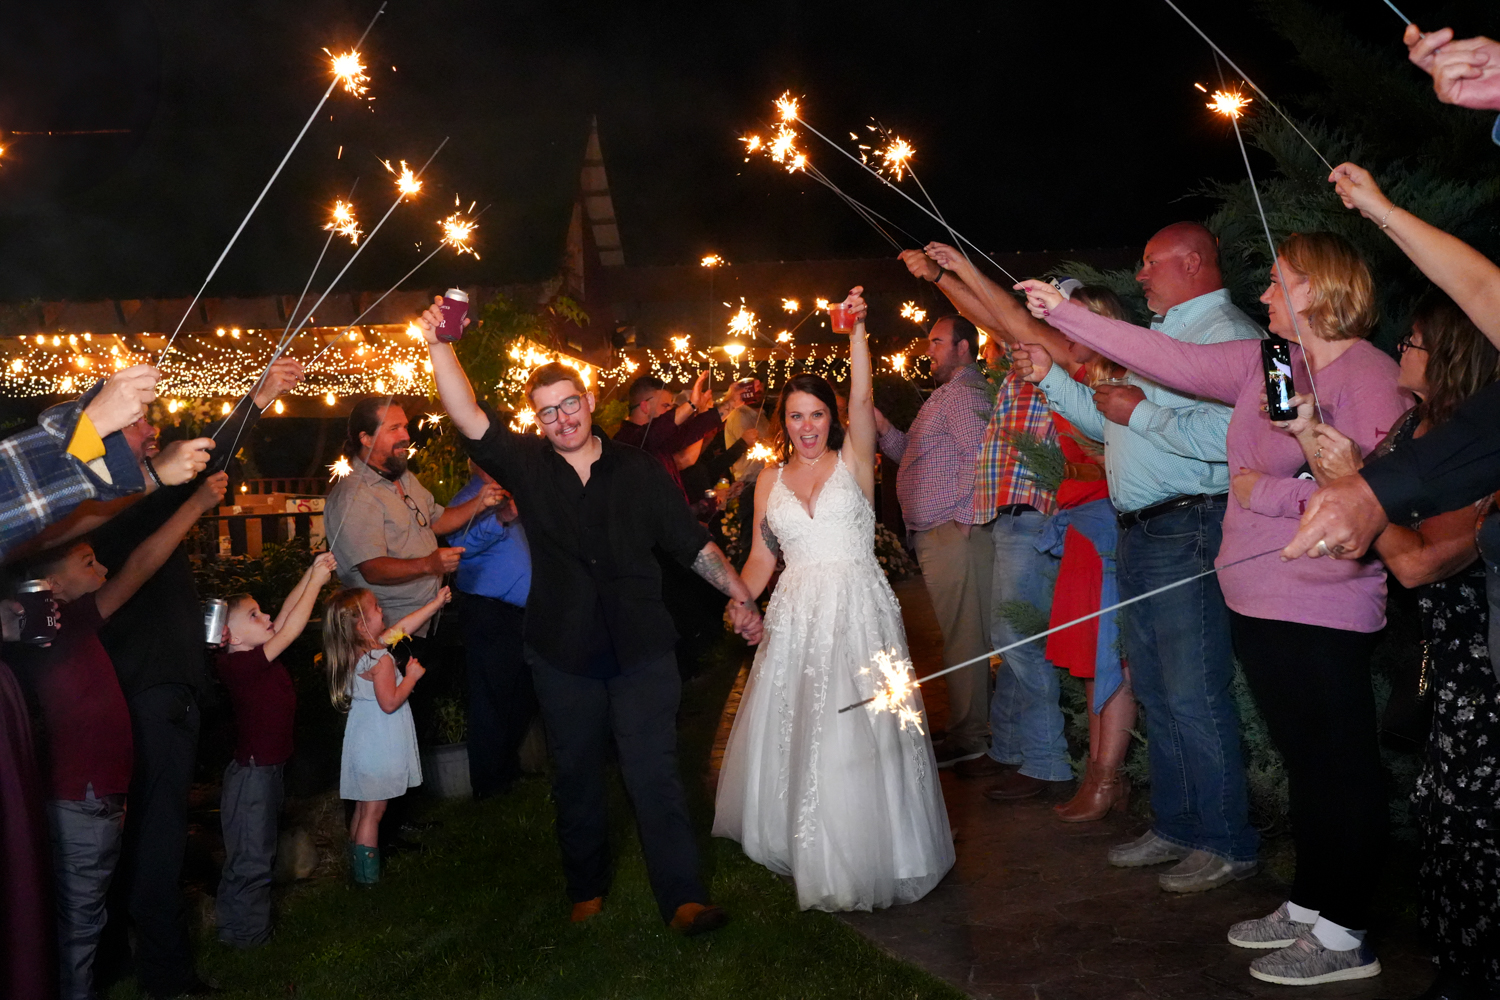 Bride and Groom with arm raised high in celebration during a sparkler exit at their wedding reception